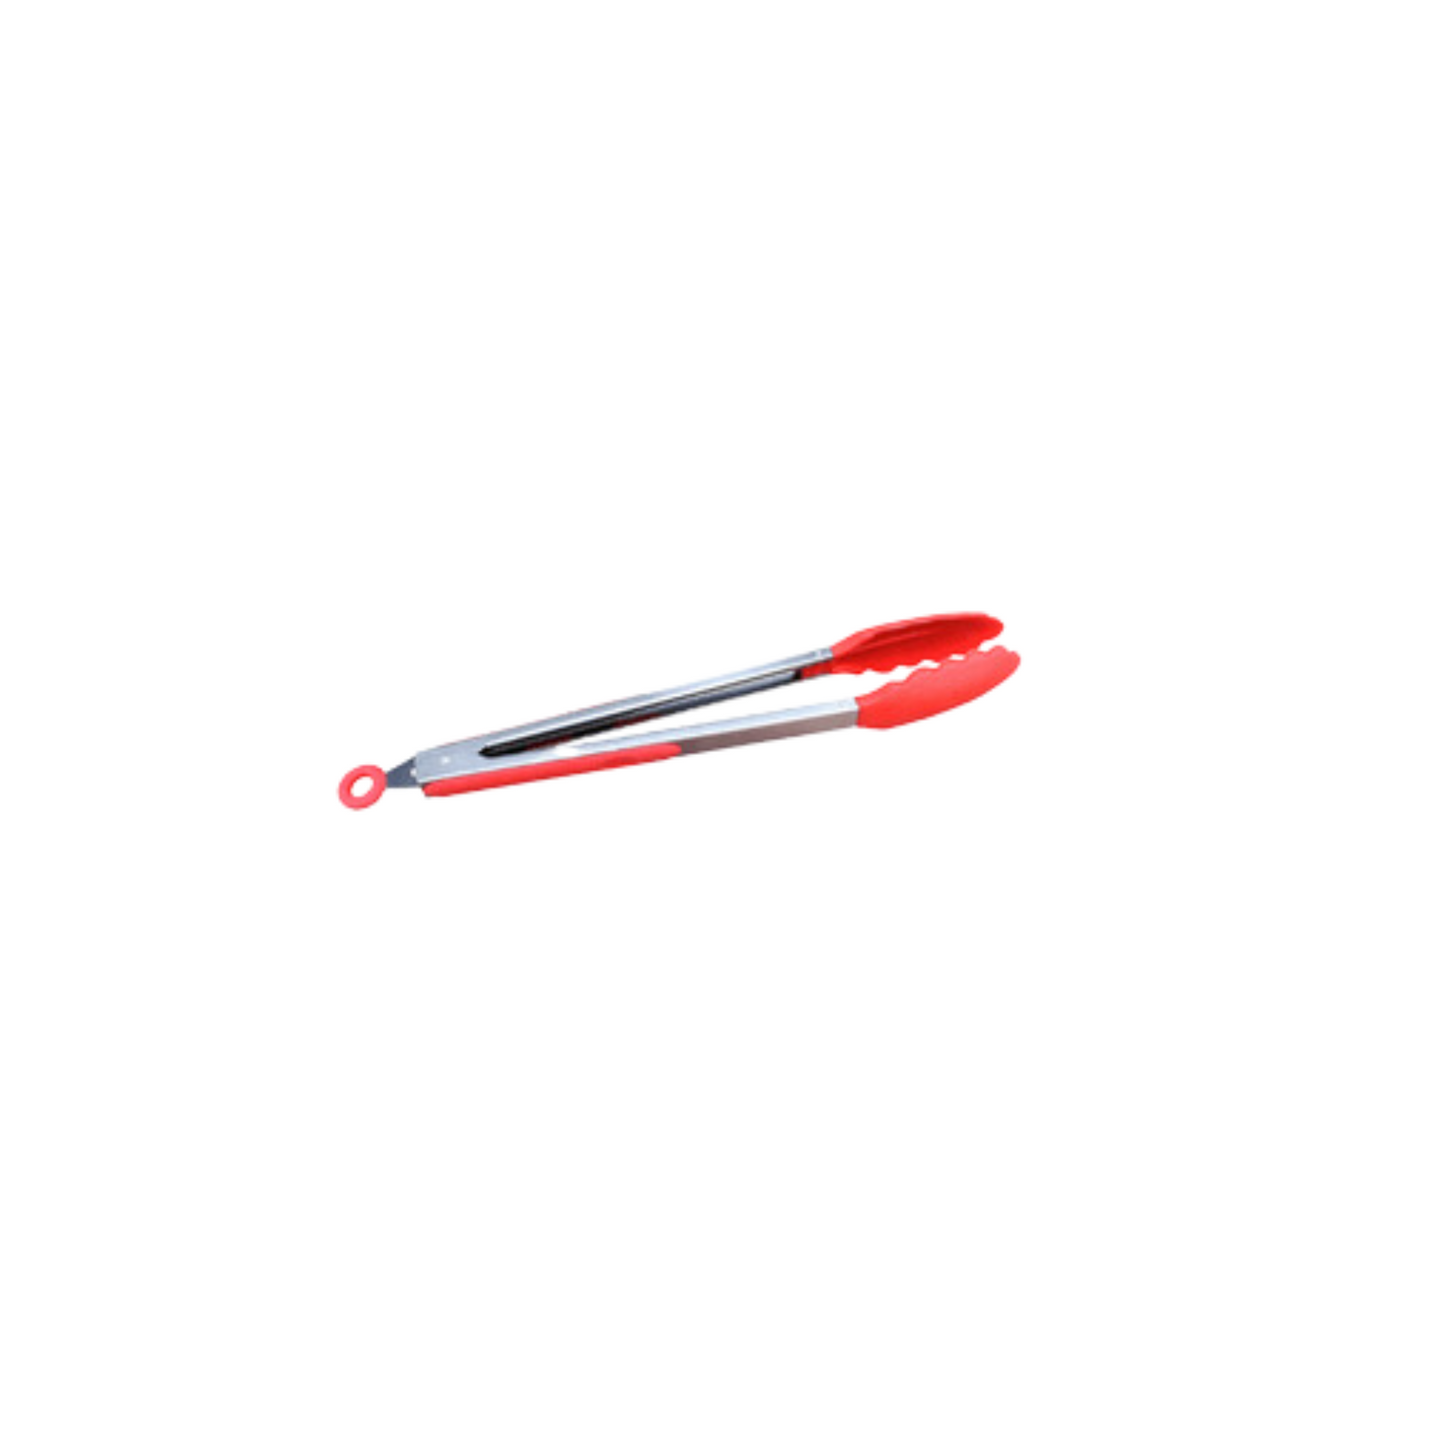 Tongs with Silicone Tip - 300MM